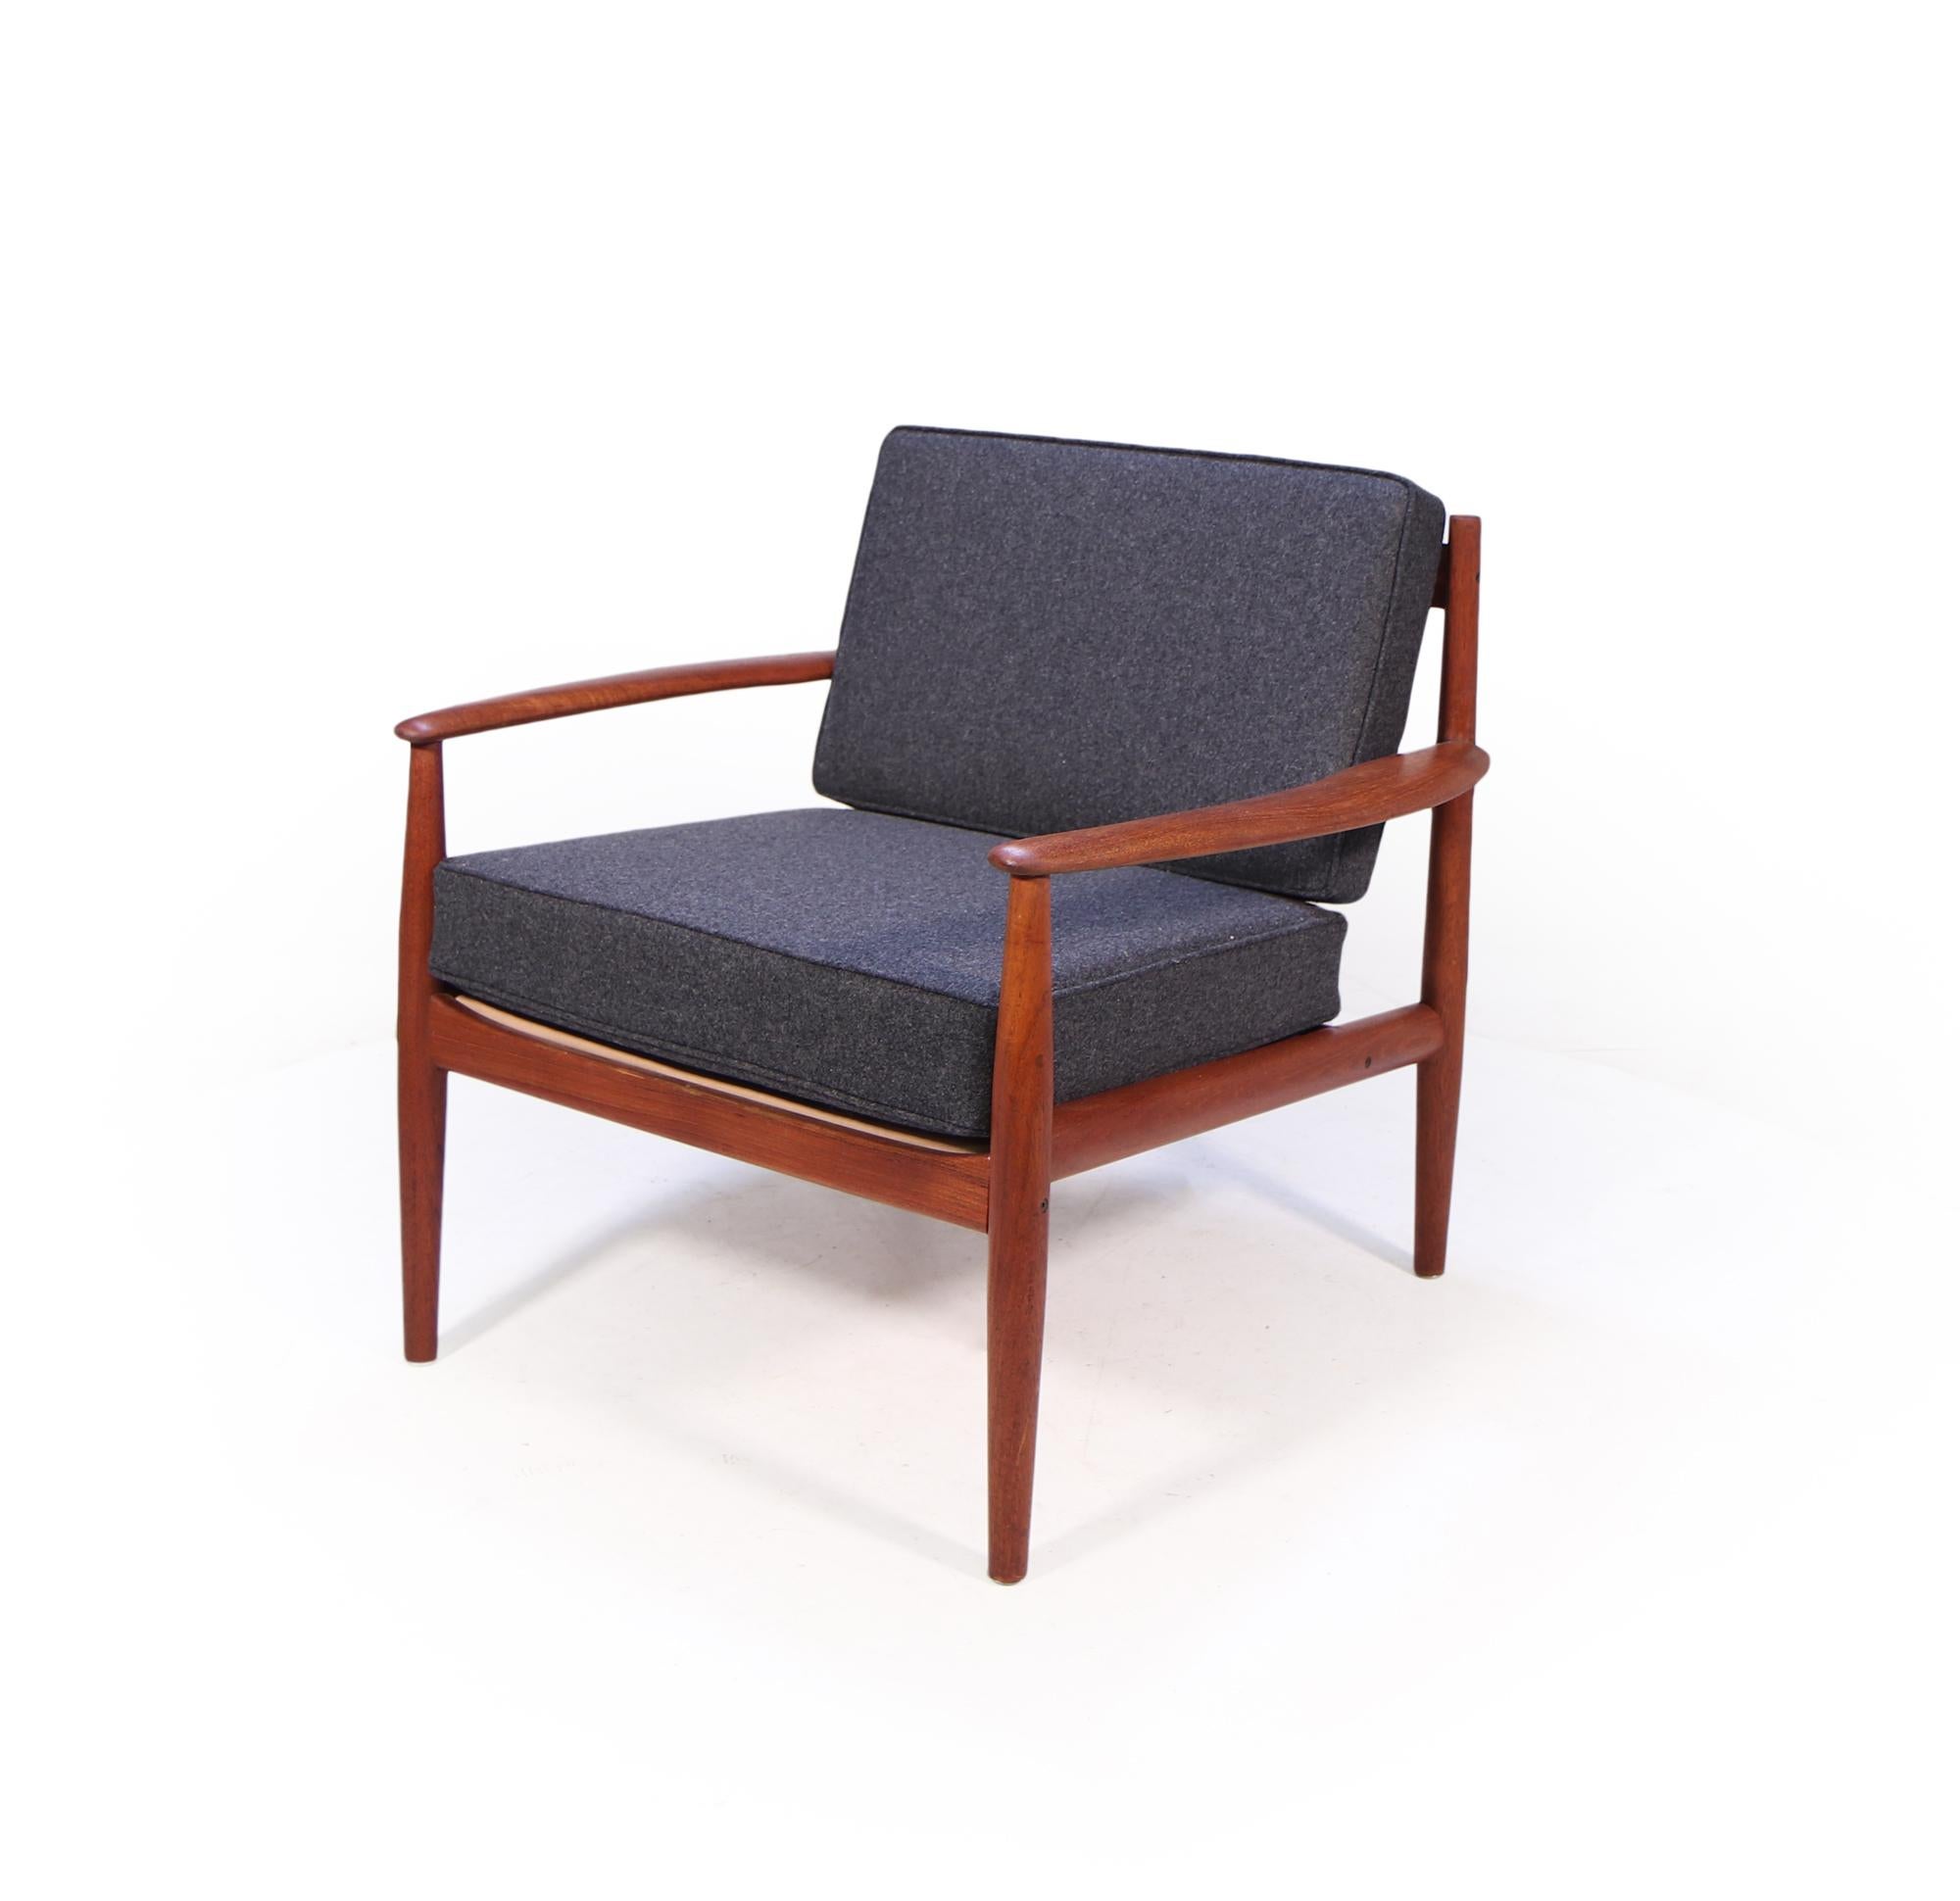 This Teak armchair was designed by Grete Jalk in 1963 and produced by renowned cabinetmakers France and Son. The chair has been restored where necessary and been fully re finished, this has had replacement cushions and covered in charcoal grey wool